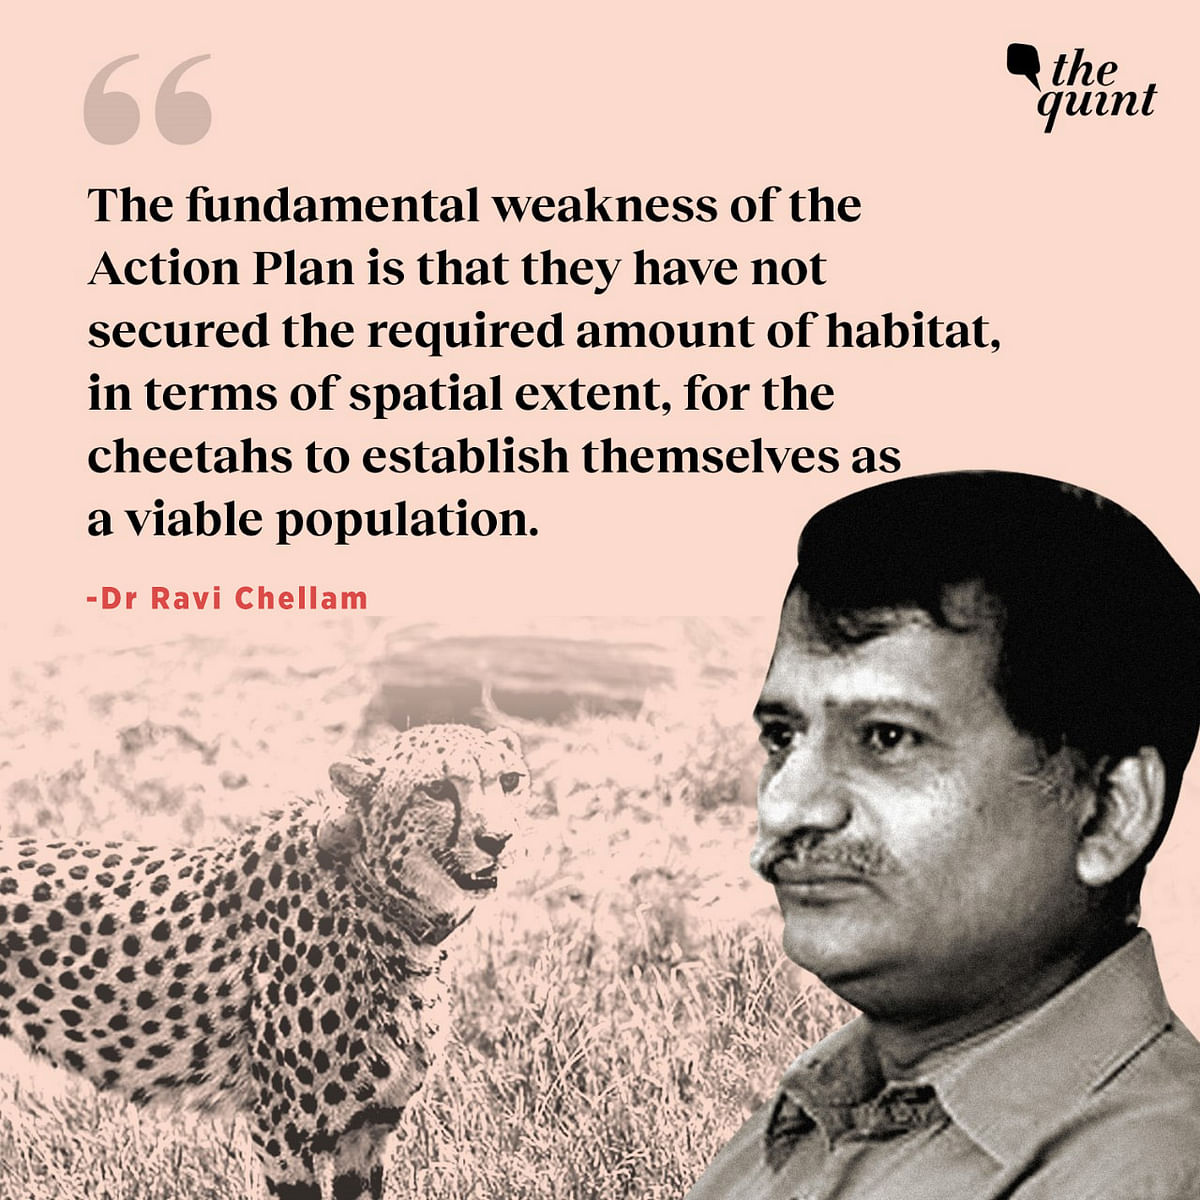 Dr Ravi Chellam speaks on the likelihood of the Cheetah Action Plan's success and more in this interview. 